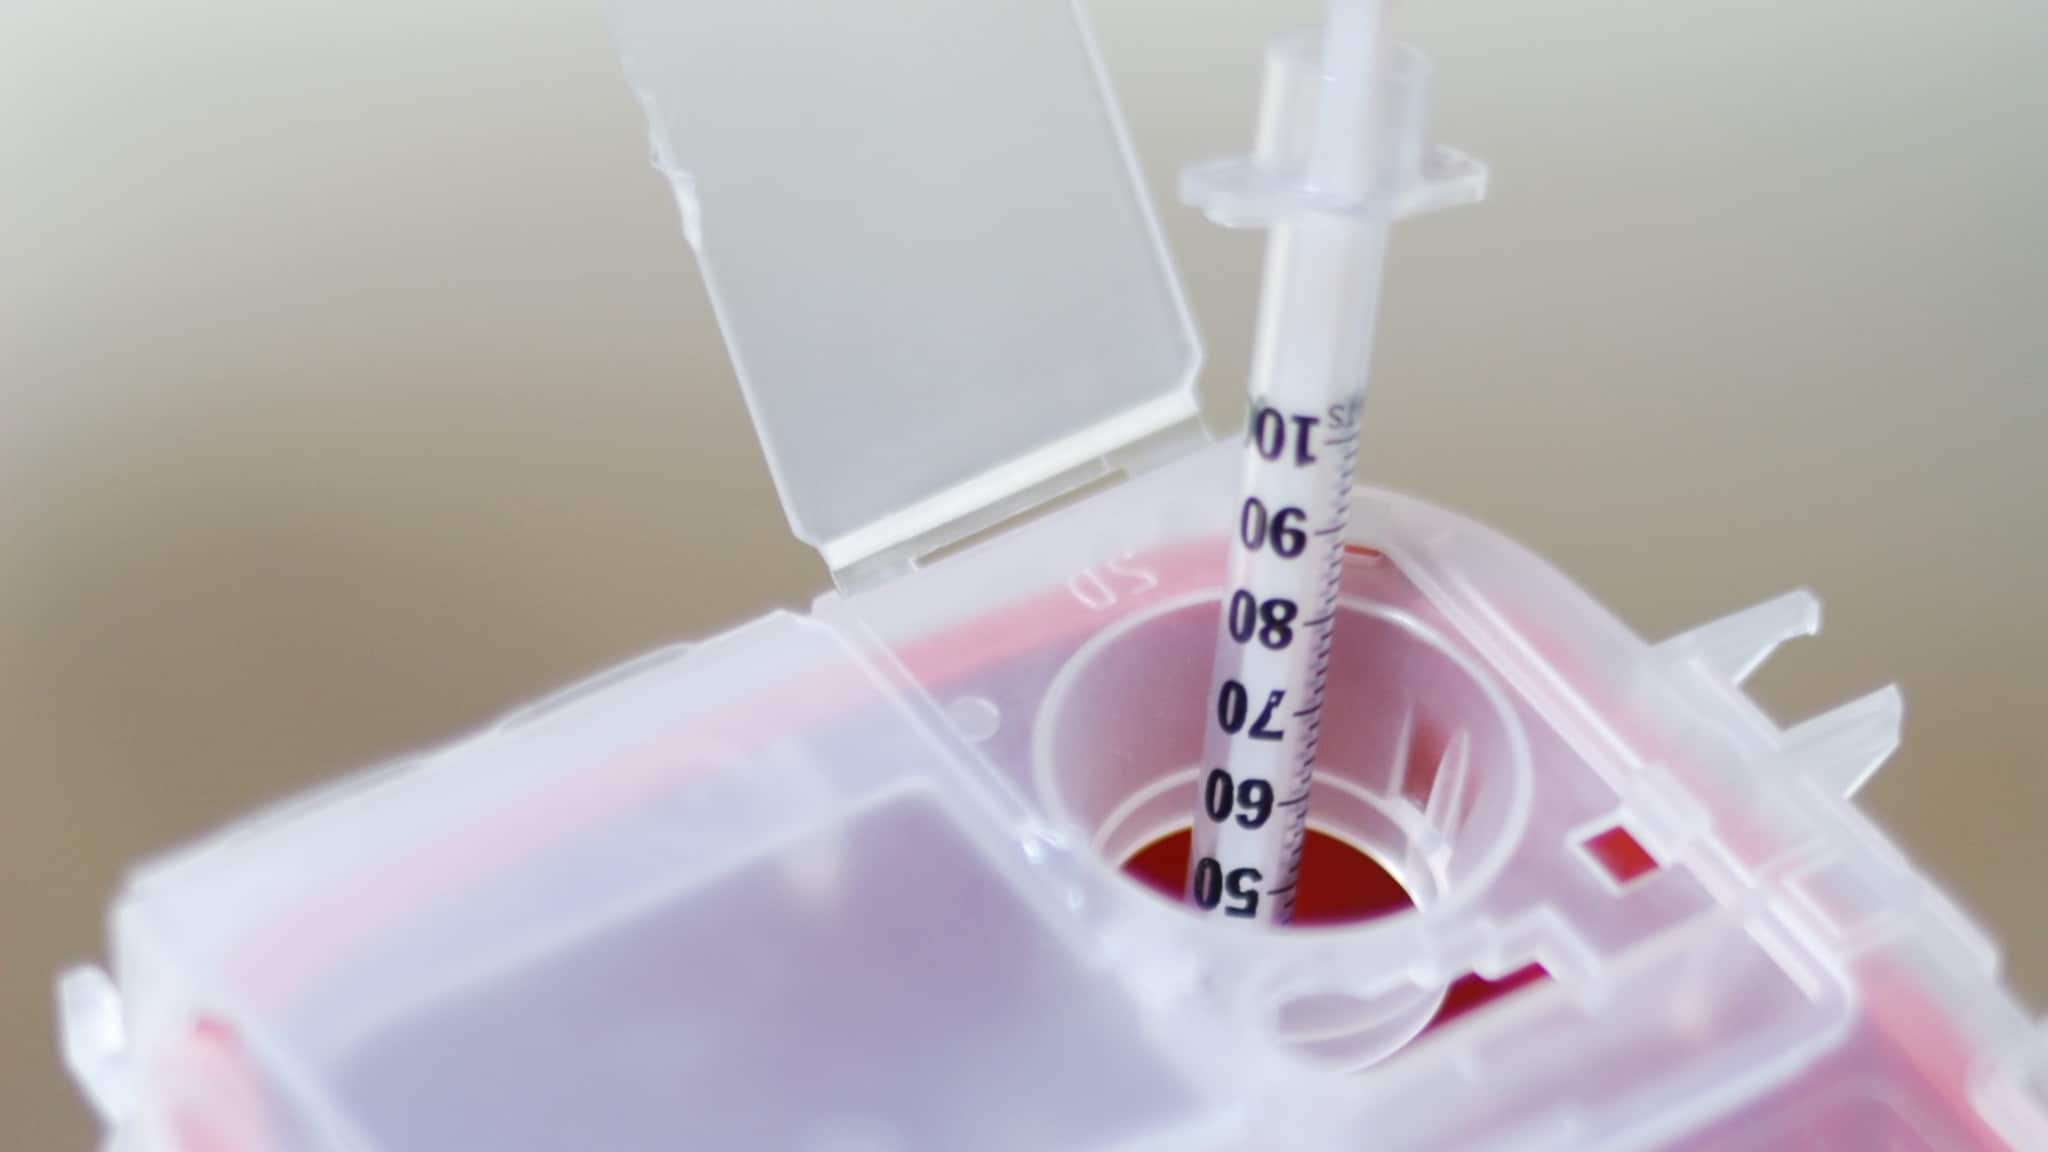 A needle being placed in a sharps disposal container.